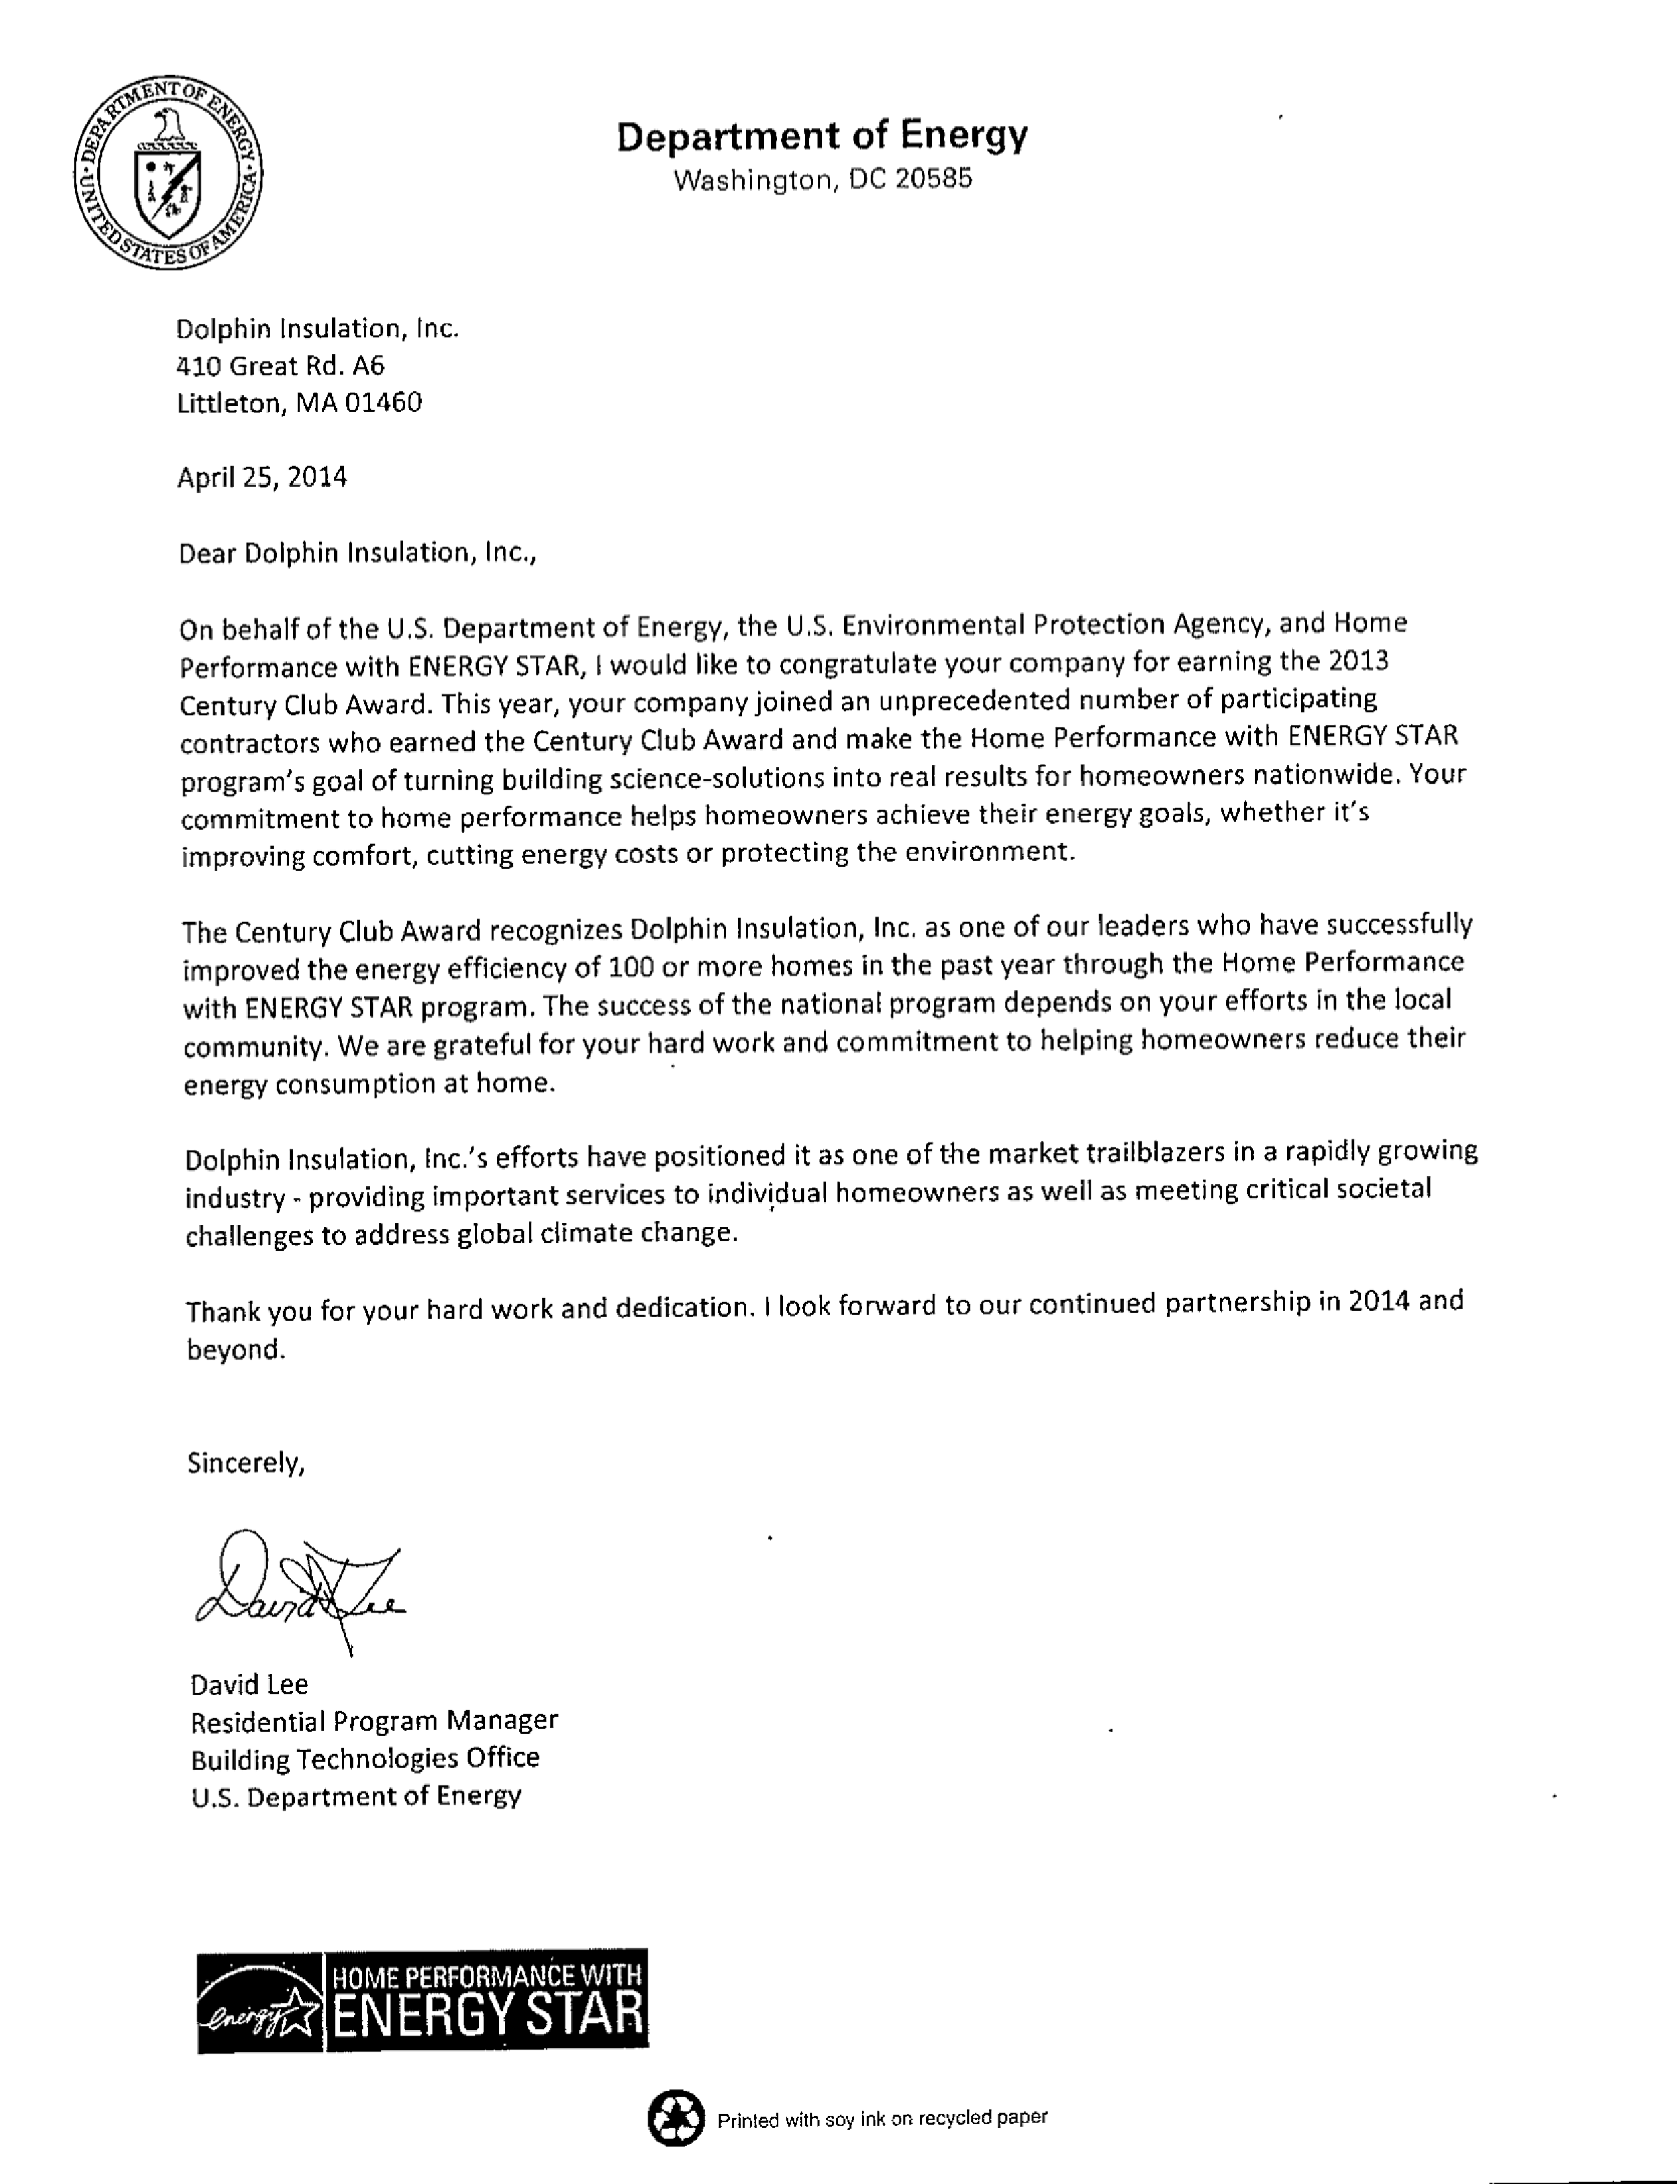 Department of Energy Letter